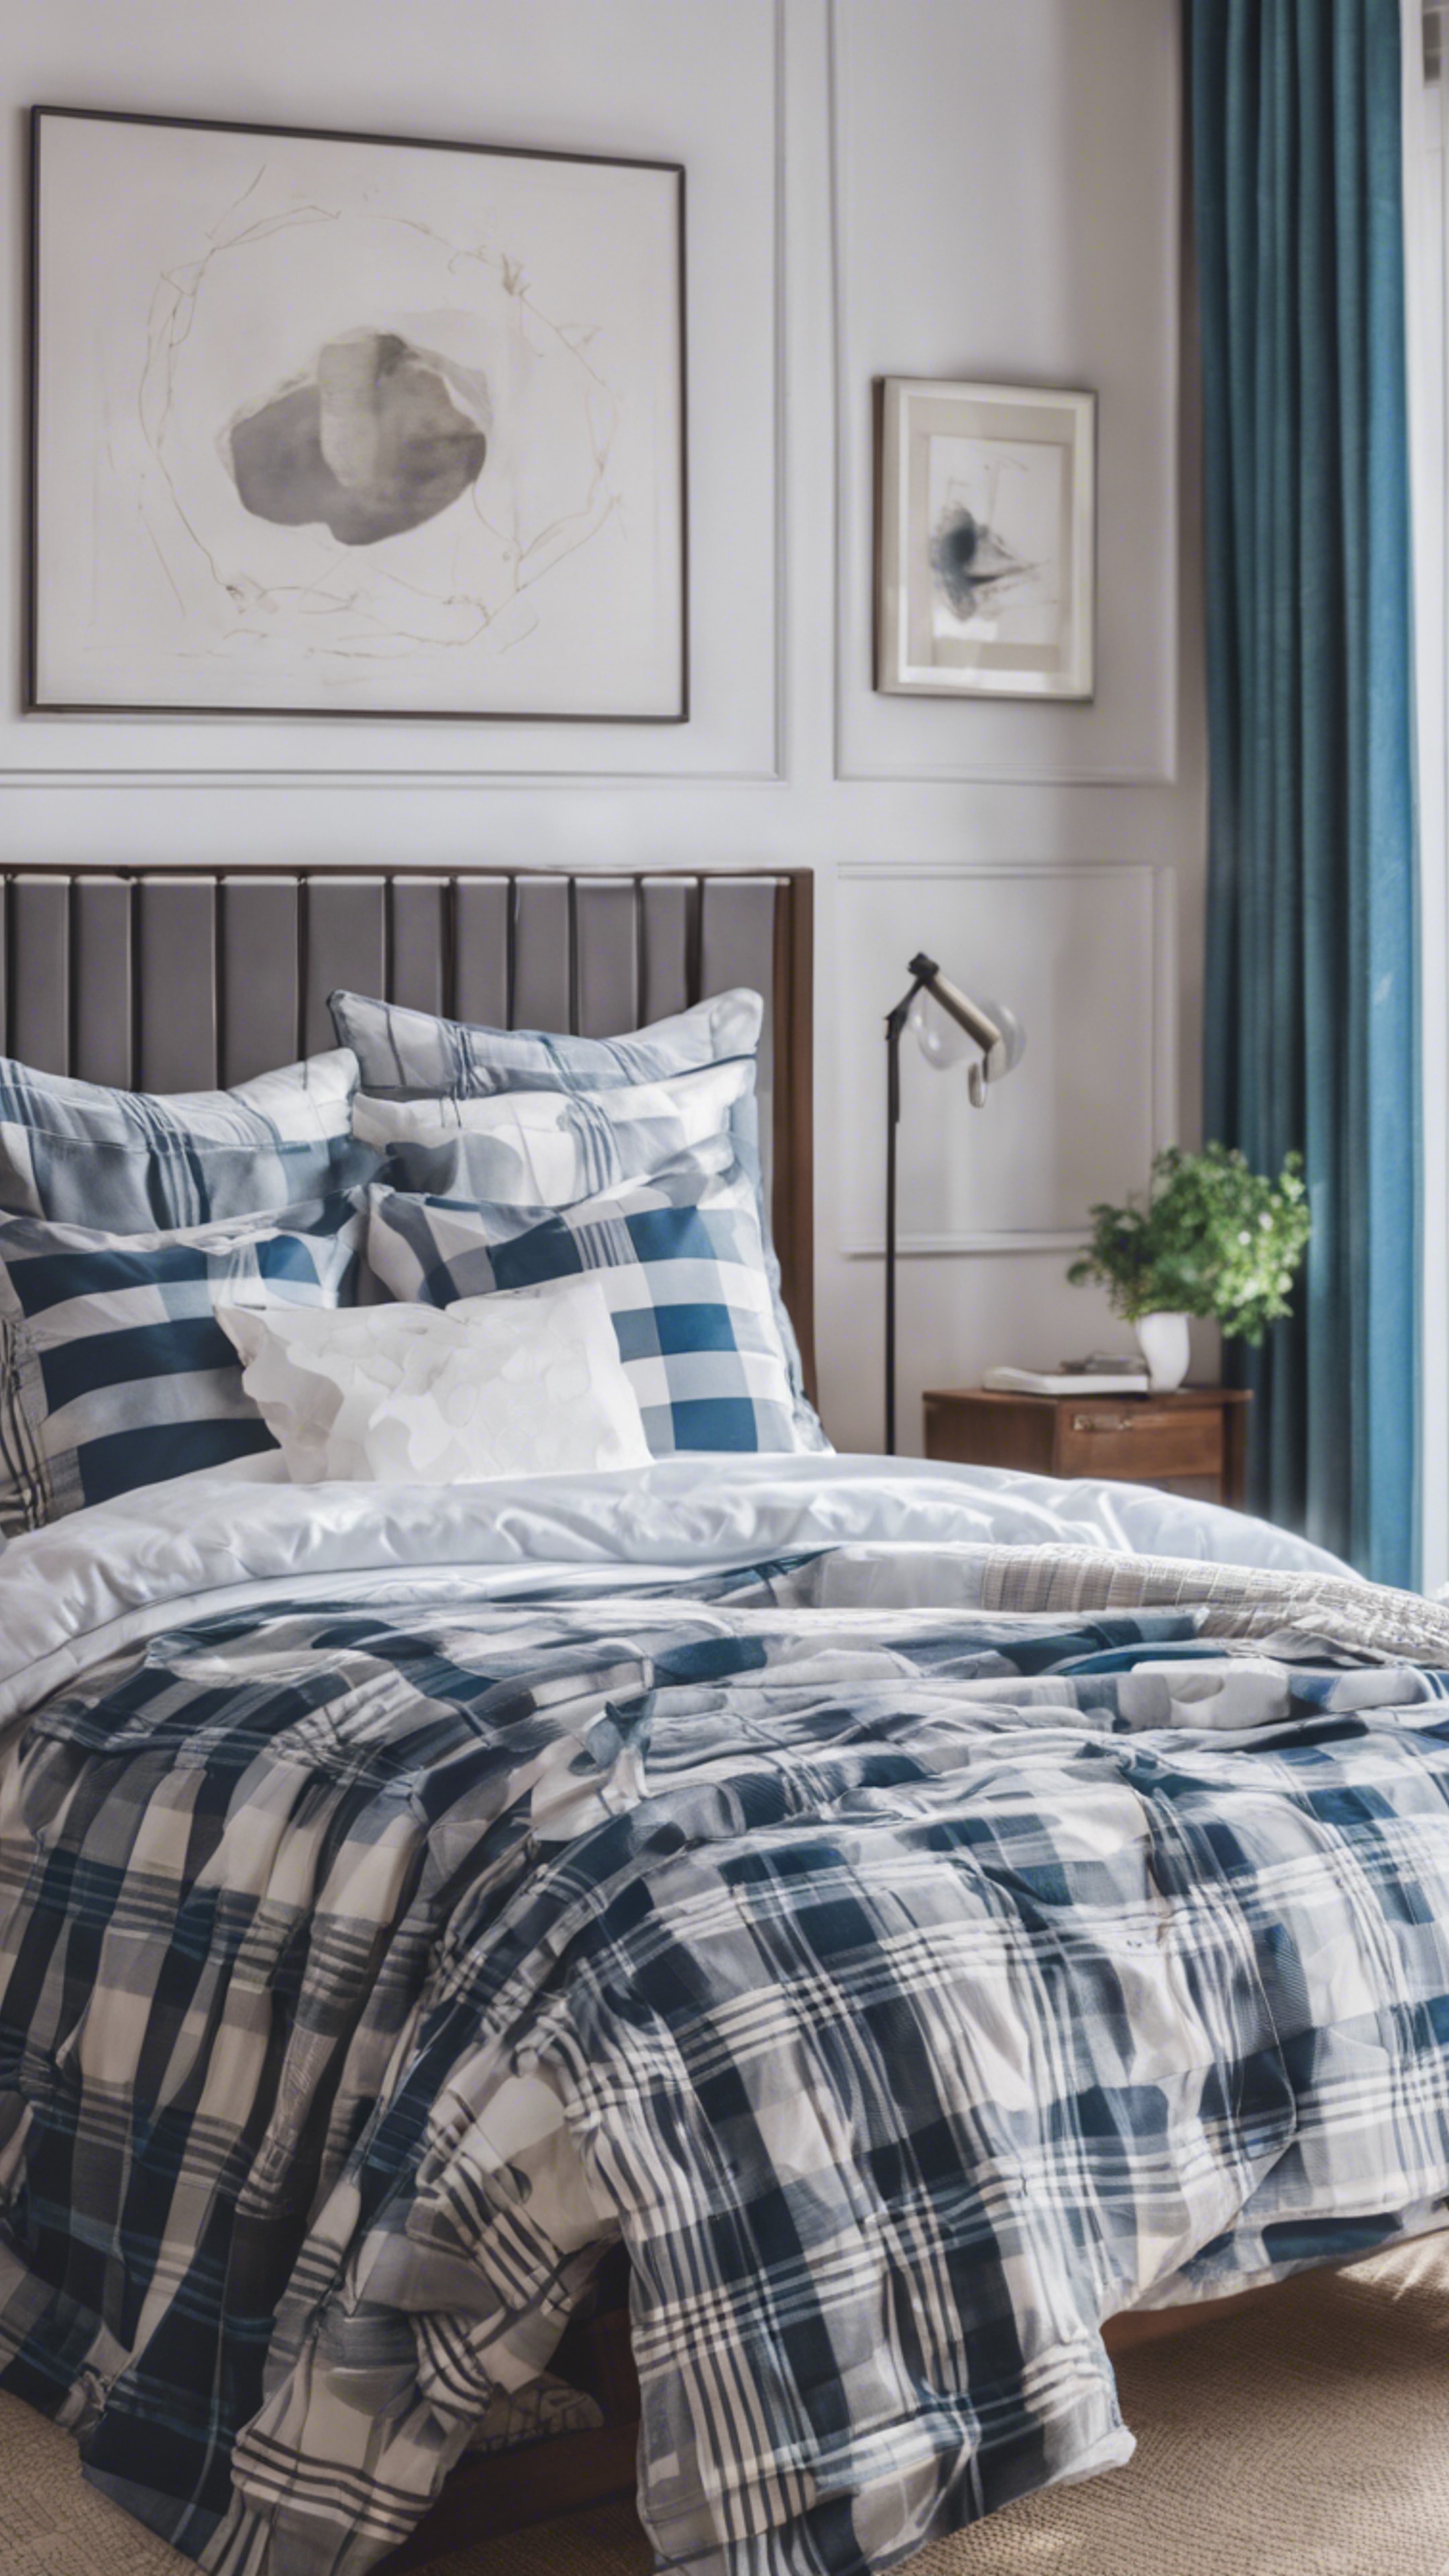 A preppy style bedroom with blue and white plaid bedding on a crisp white bed.壁紙[948866b313a64ea69f8f]